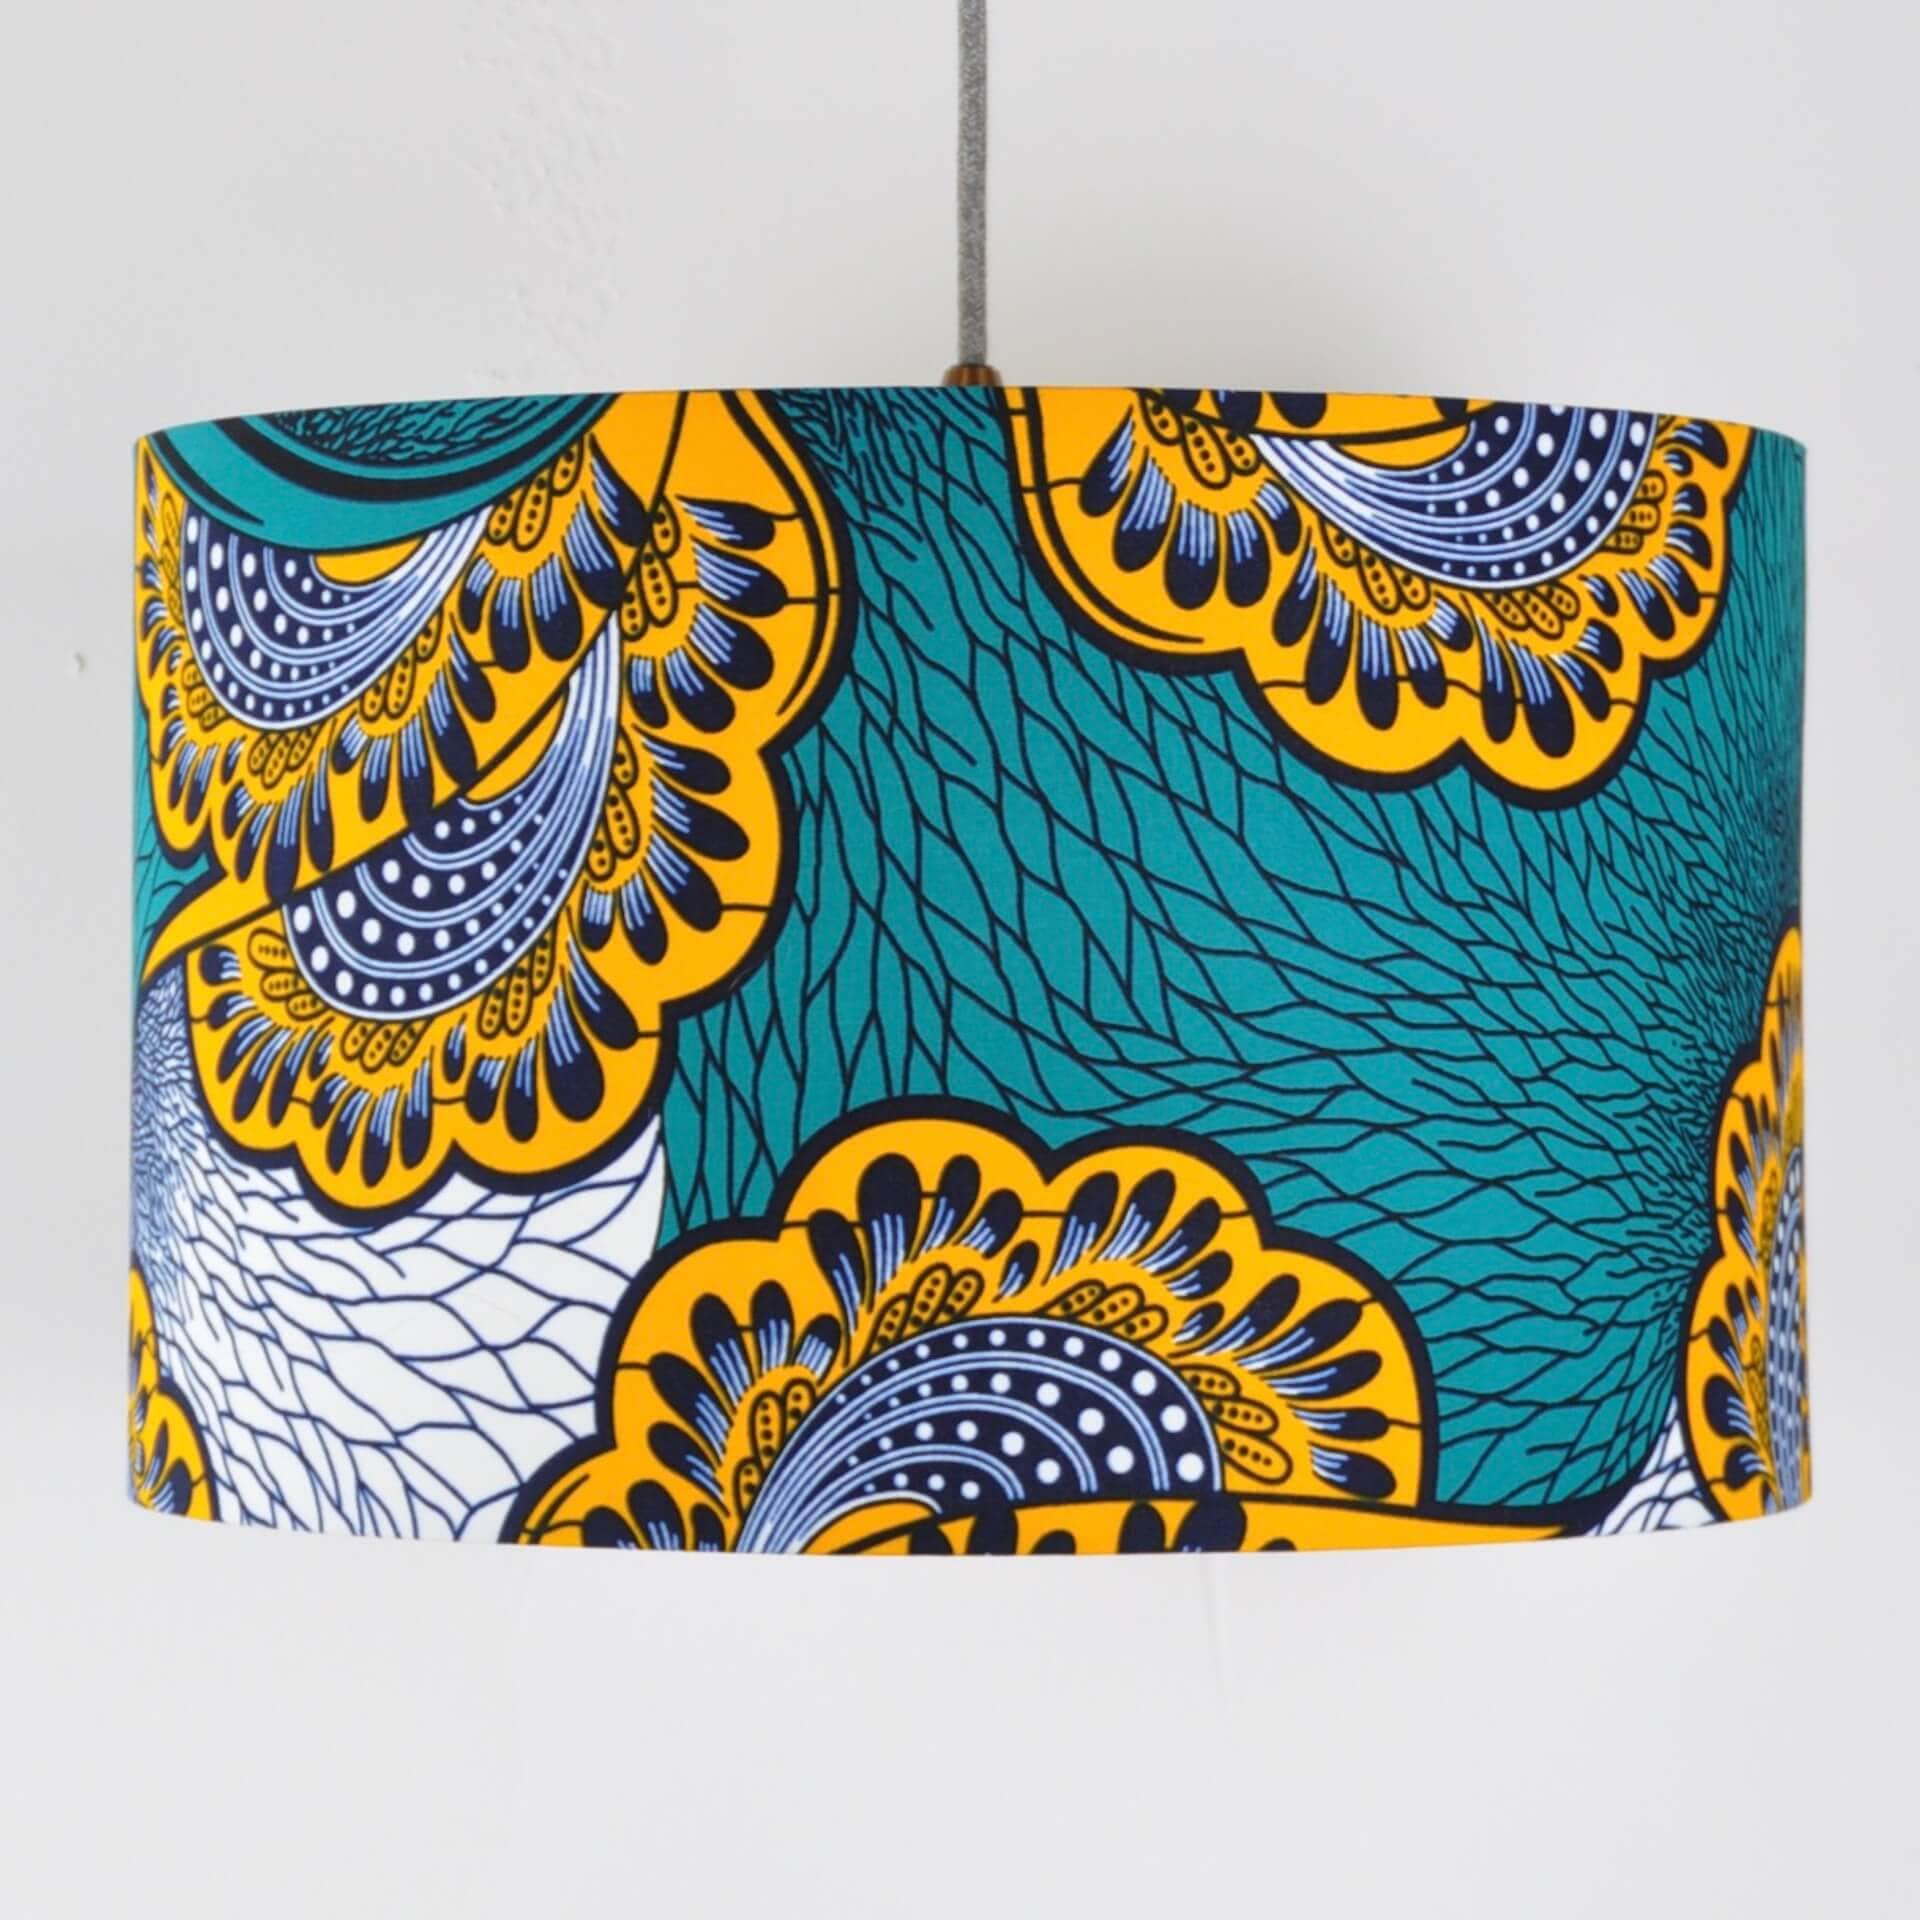 Colourful Shadez Bristol ⌀40cm x 25cm African Print Lampshade - Teal & Yellow Peacock Feather (various sizes)